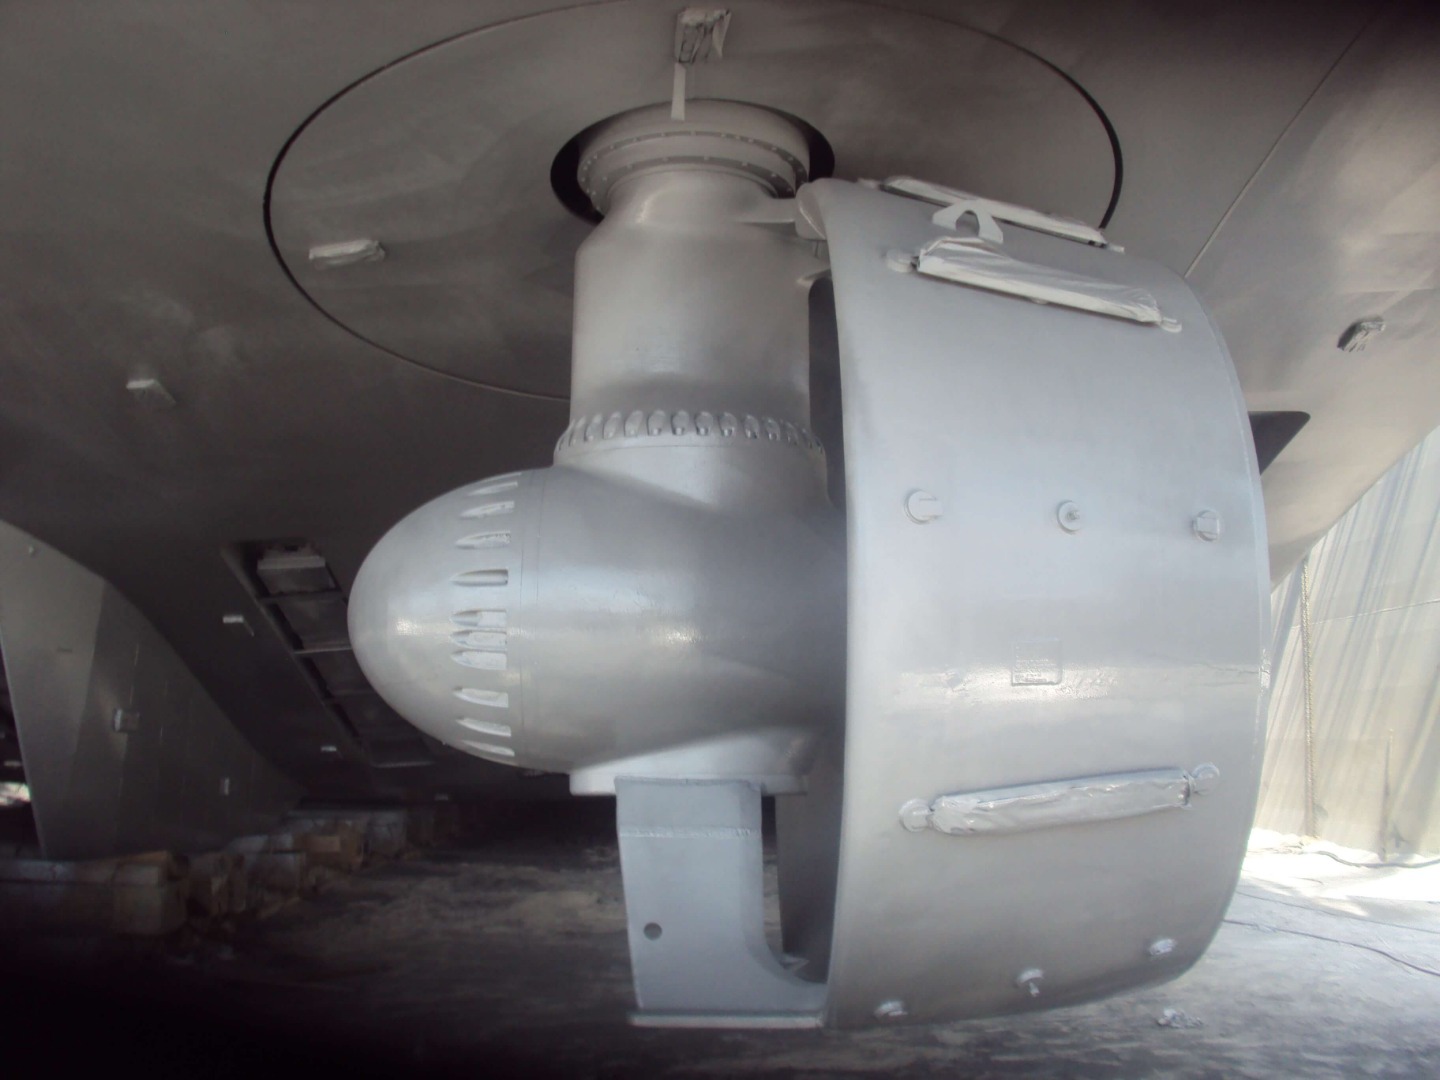 A marine vessel propeller and part of the hull are shown following application of a gray surface-tolerant mastic primer.